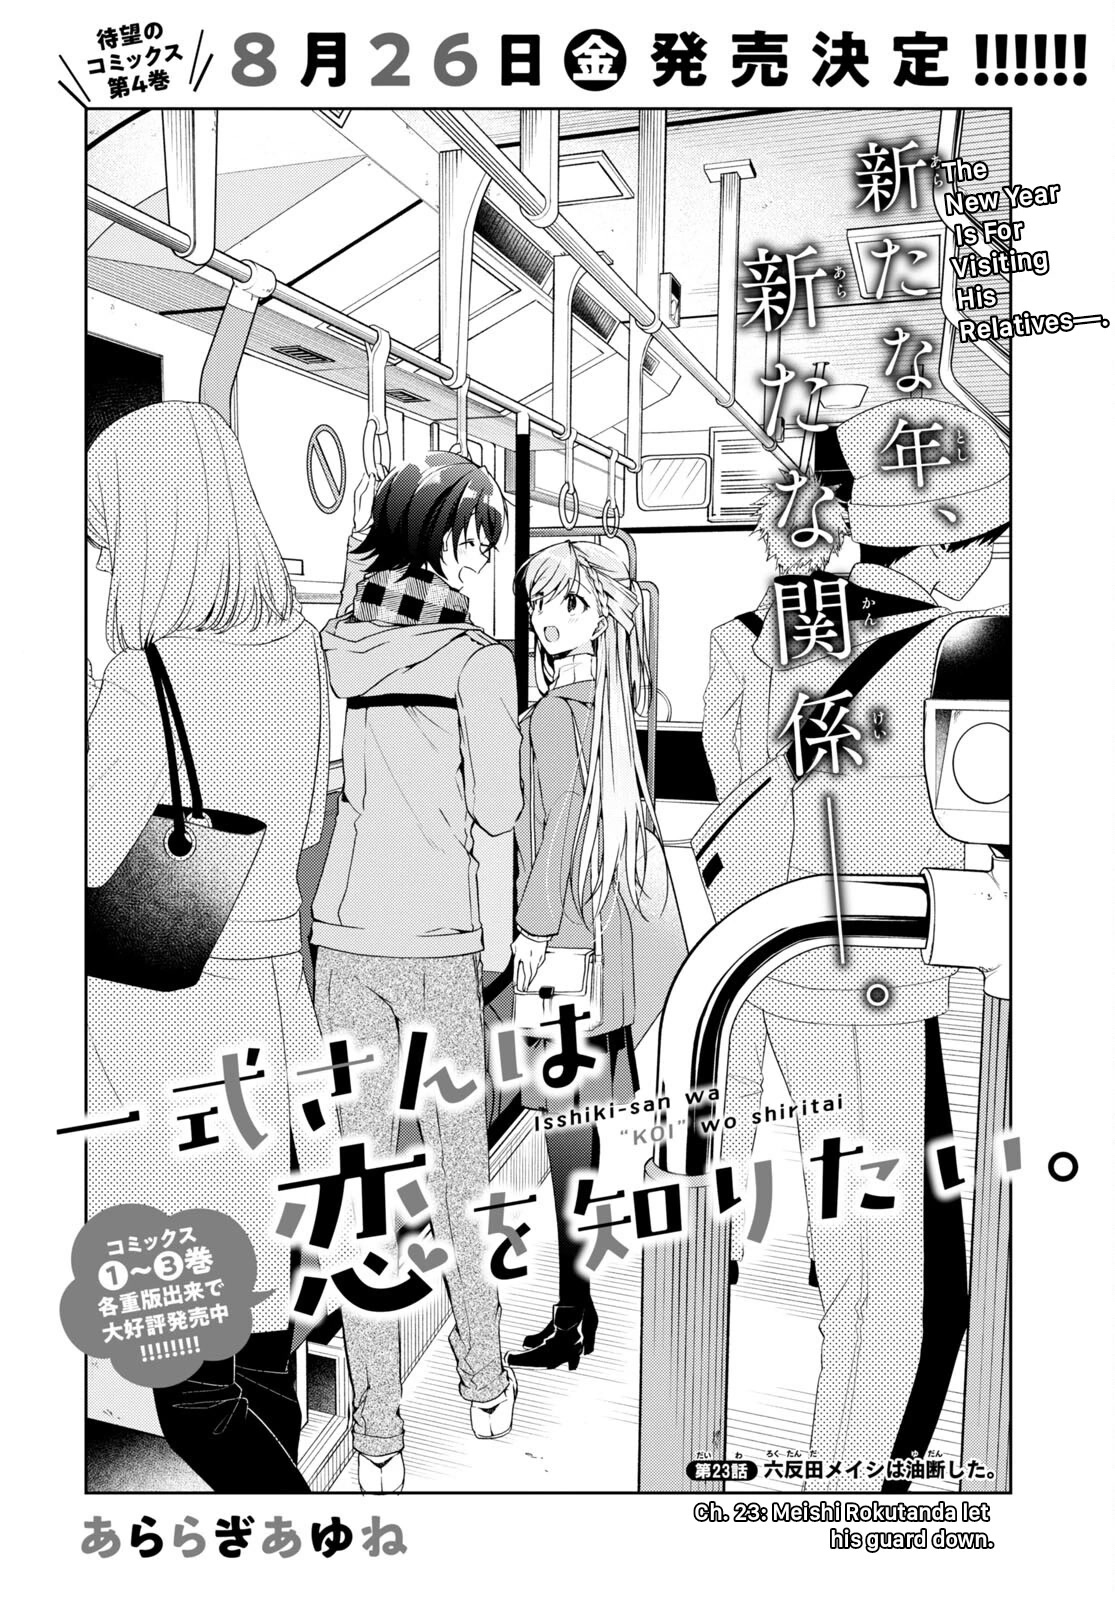 Isshiki-san Wants to Know About Love. - chapter 23 - #3